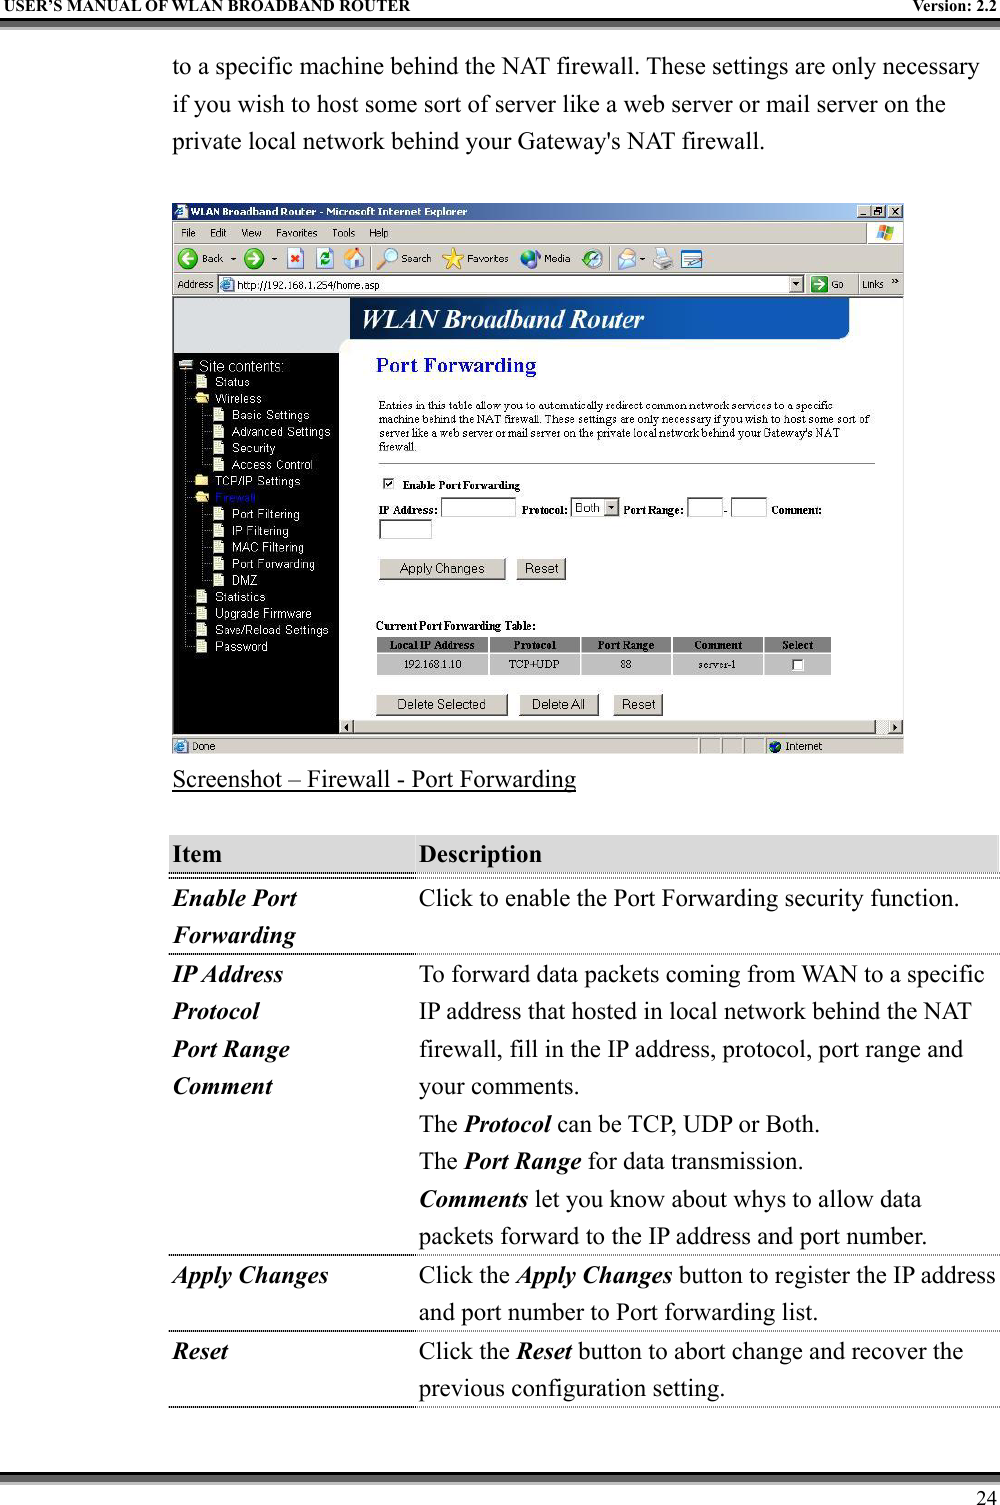   USER’S MANUAL OF WLAN BROADBAND ROUTER    Version: 2.2     24 to a specific machine behind the NAT firewall. These settings are only necessary if you wish to host some sort of server like a web server or mail server on the private local network behind your Gateway&apos;s NAT firewall.   Screenshot – Firewall - Port Forwarding  Item  Description   Enable Port Forwarding Click to enable the Port Forwarding security function. IP Address Protocol Port Range Comment To forward data packets coming from WAN to a specific IP address that hosted in local network behind the NAT firewall, fill in the IP address, protocol, port range and your comments. The Protocol can be TCP, UDP or Both. The Port Range for data transmission. Comments let you know about whys to allow data packets forward to the IP address and port number. Apply Changes Click the Apply Changes button to register the IP address and port number to Port forwarding list. Reset  Click the Reset button to abort change and recover the previous configuration setting. 